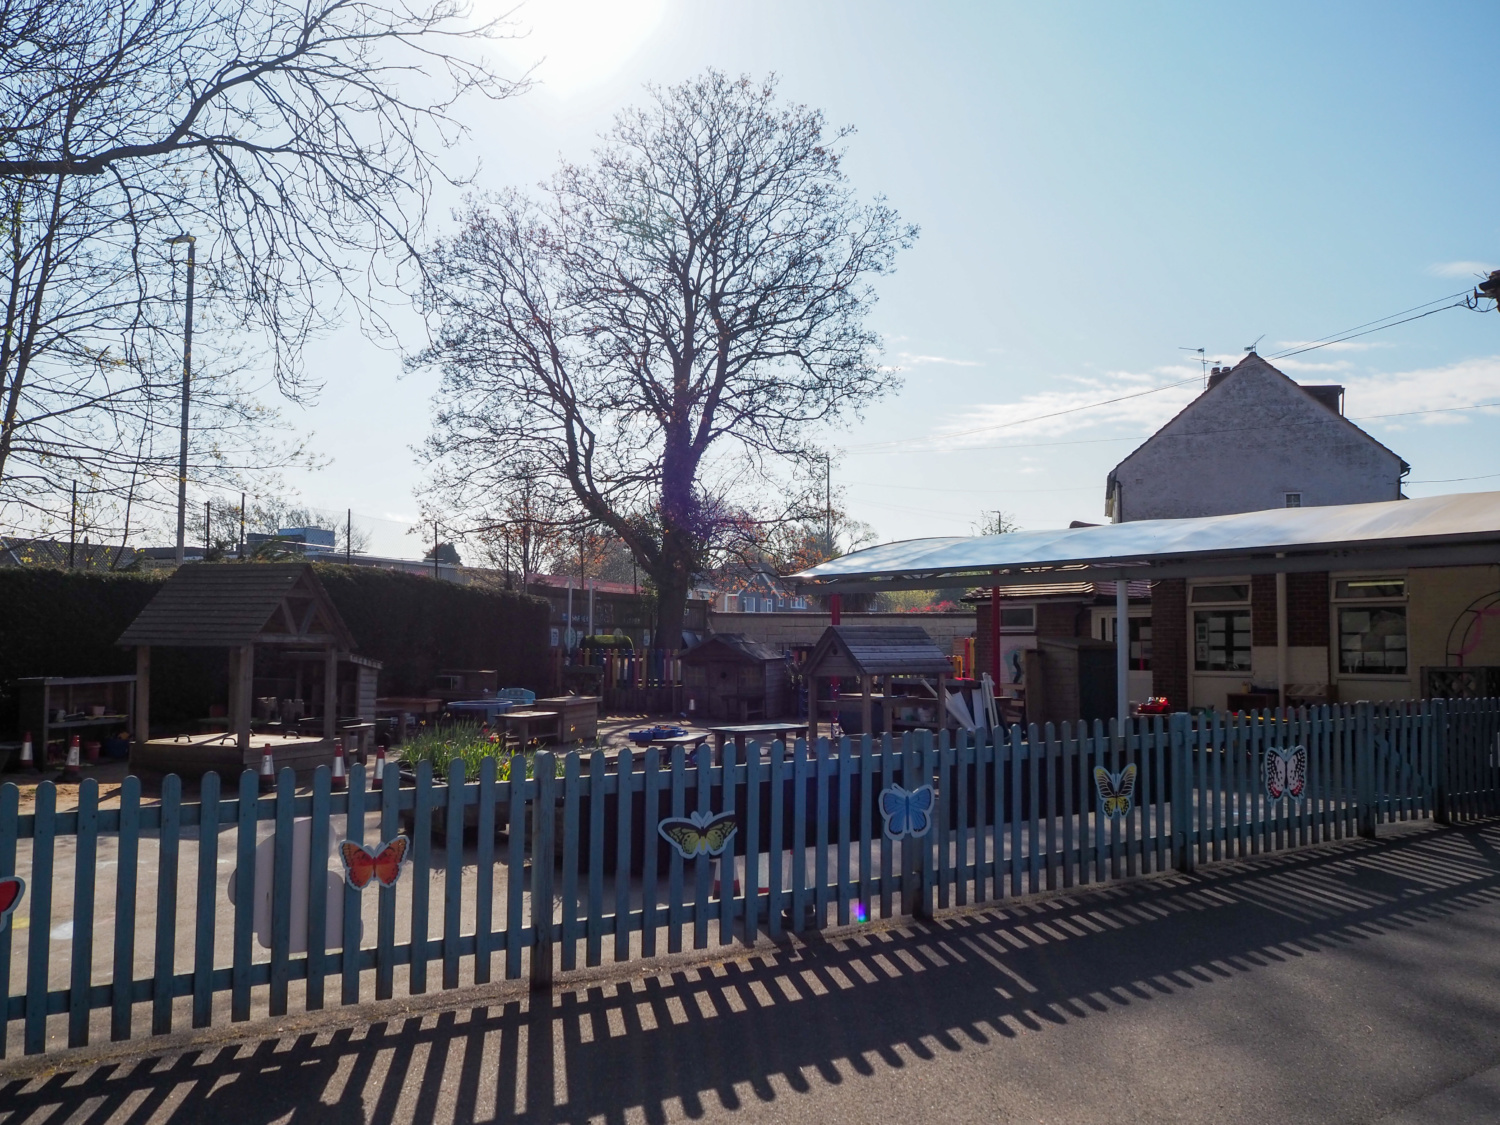 Exterior shot of the Oaks Primary Academy building, showing the outdoor play area.